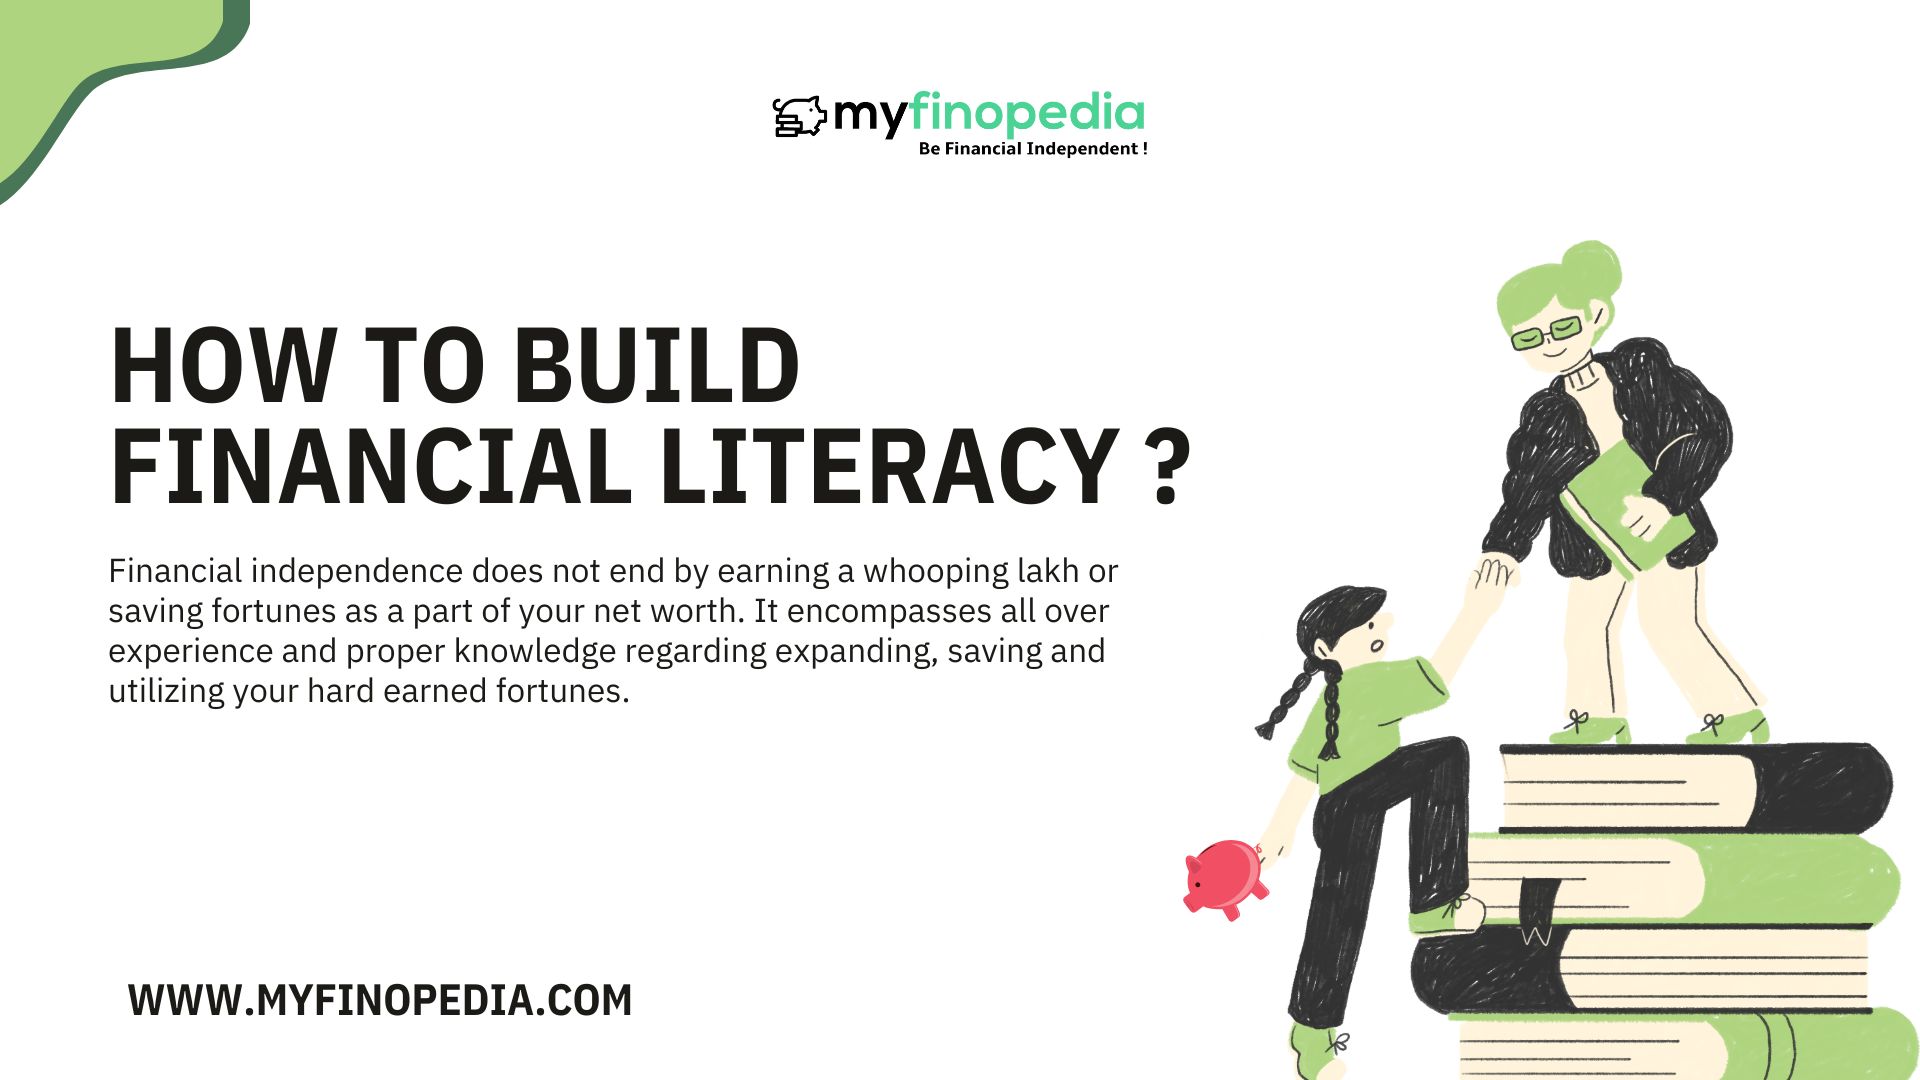 How to Build Financial Literacy